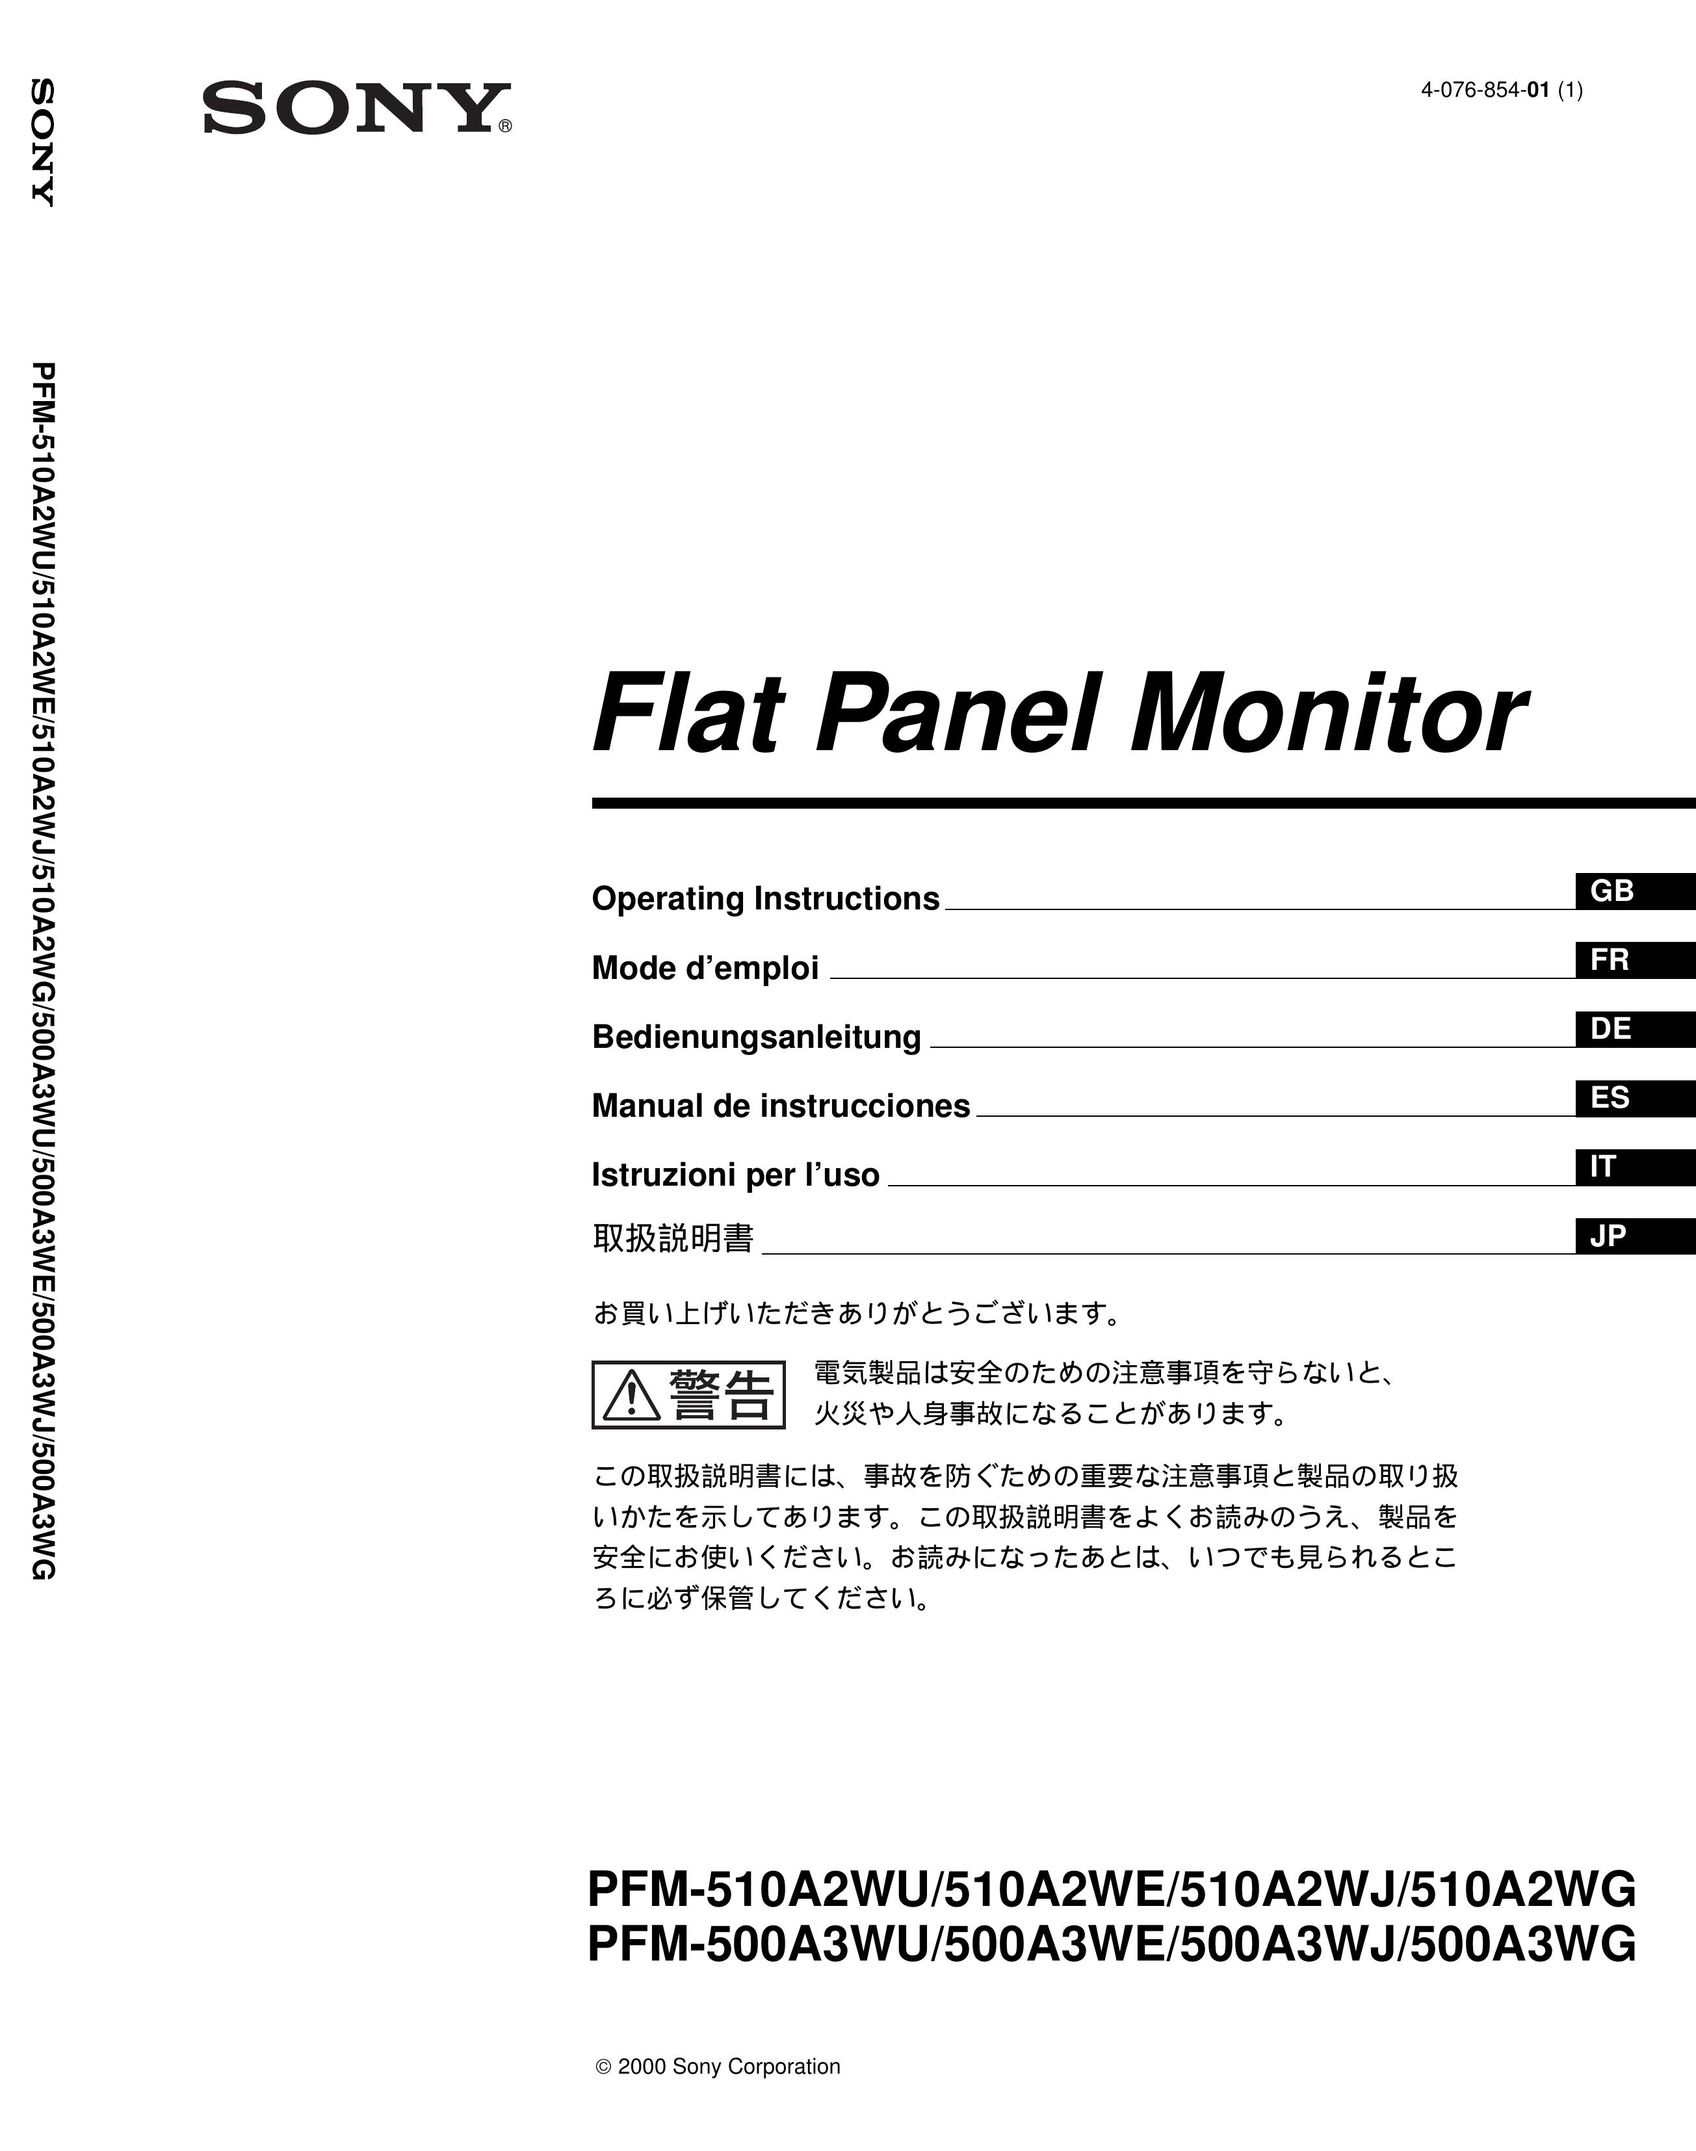 Sony 510A2WG Computer Monitor User Manual